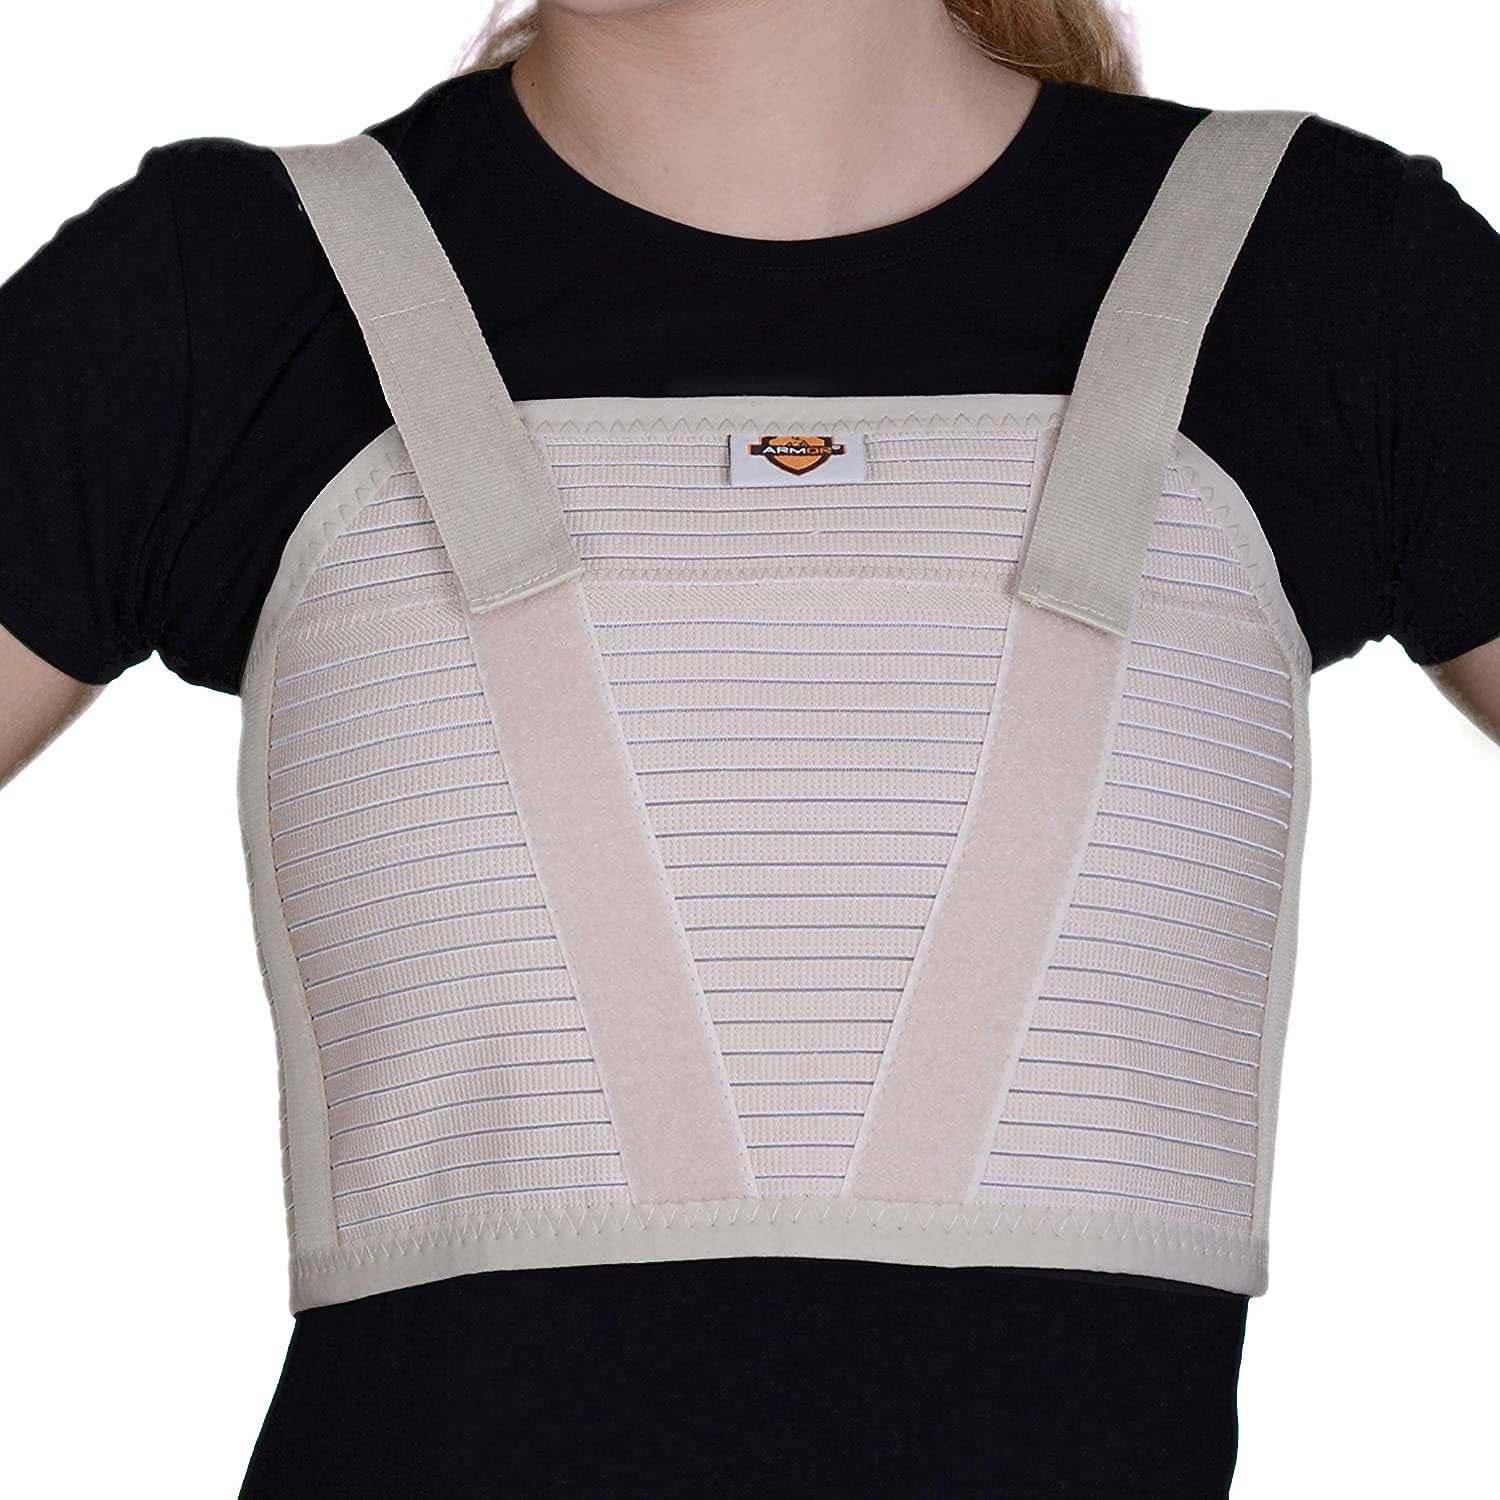 Armor Adult Unisex Chest Support Brace to Stabilize the Thorax after Open  Heart Surgery, Thoracic Procedure, or Fractures of the Sternum or Rib Cage,  Tan Color, Size XX-Large, for Men and Women